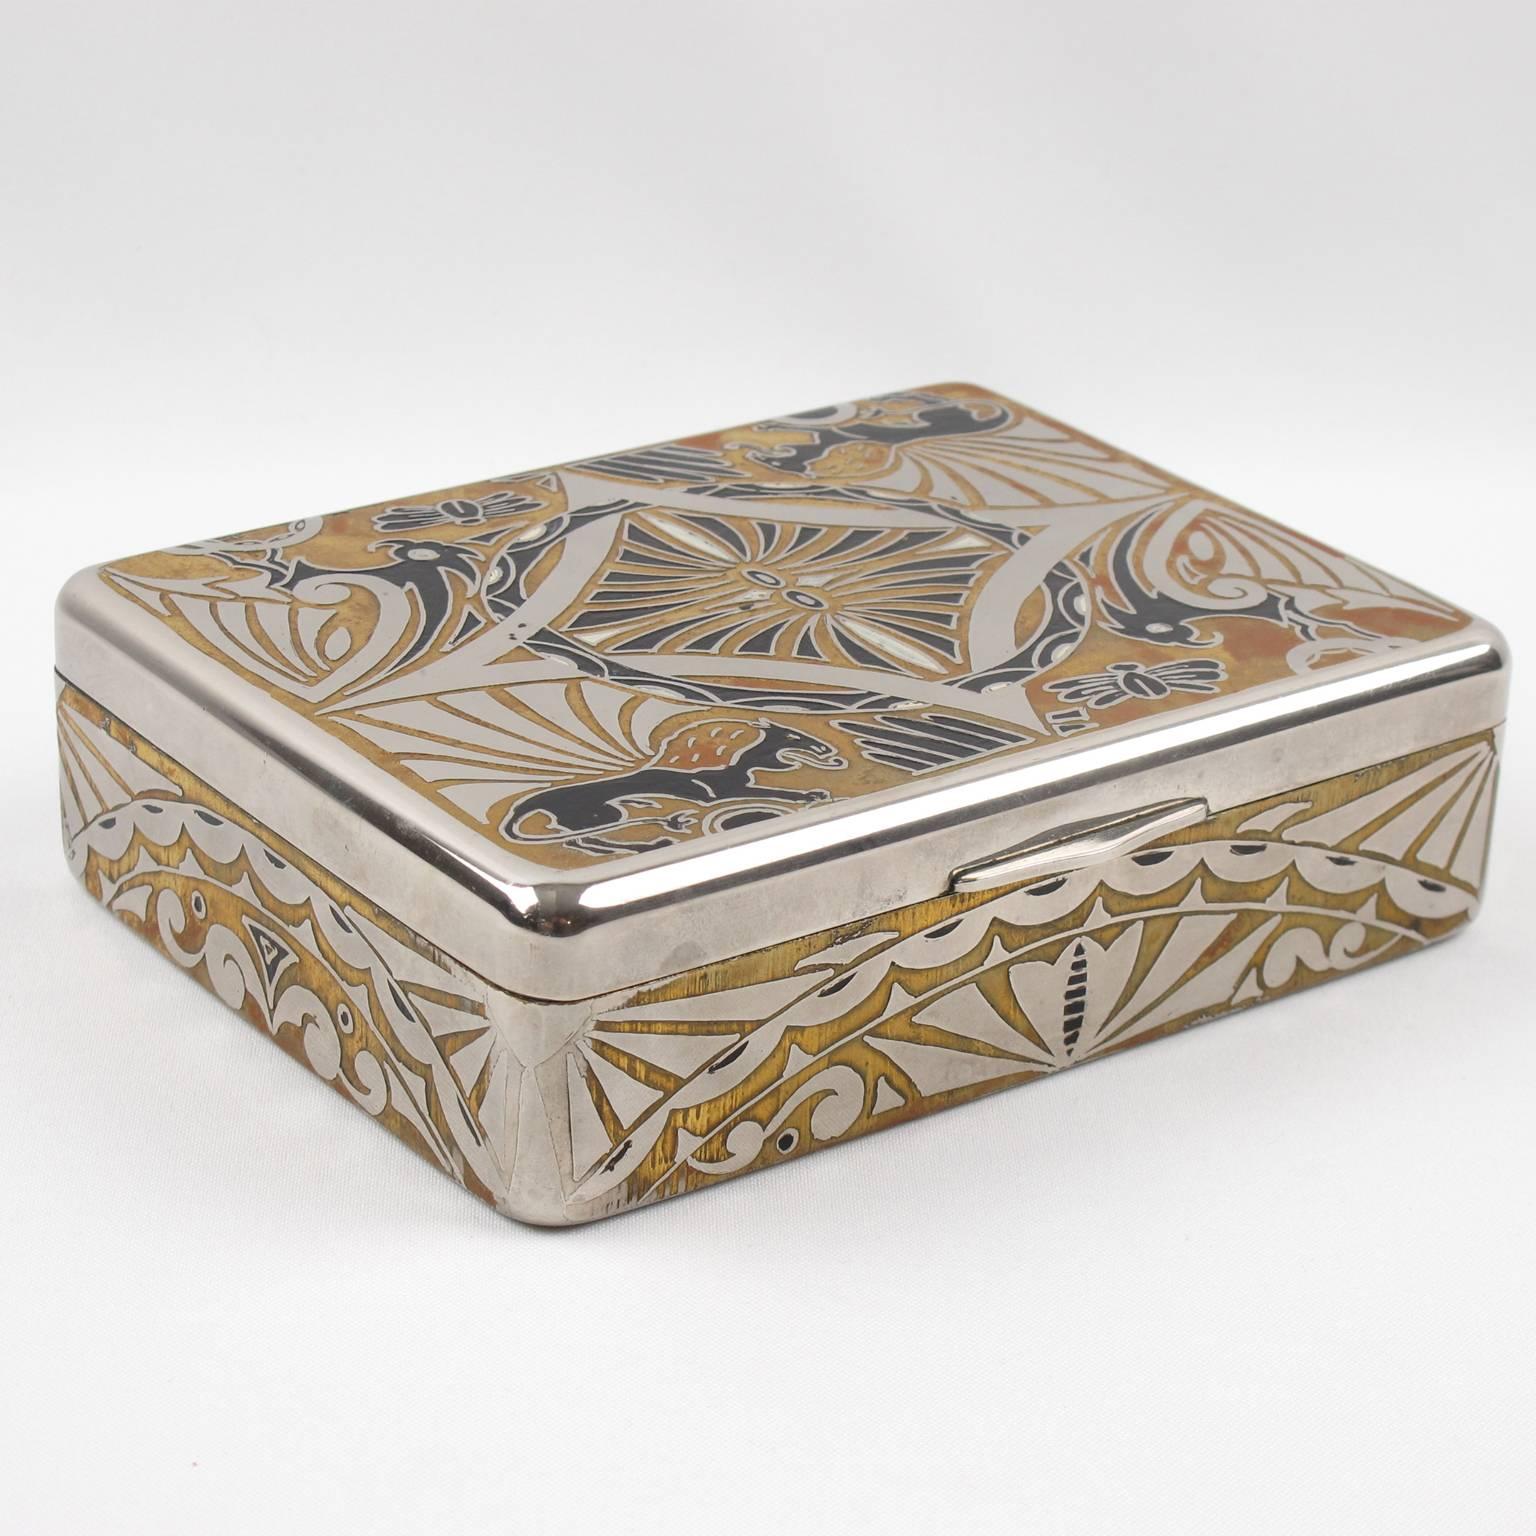 20th Century Jugendstil Polished Chrome and Brass Inlaid Decorative Box, Germany, 1910s